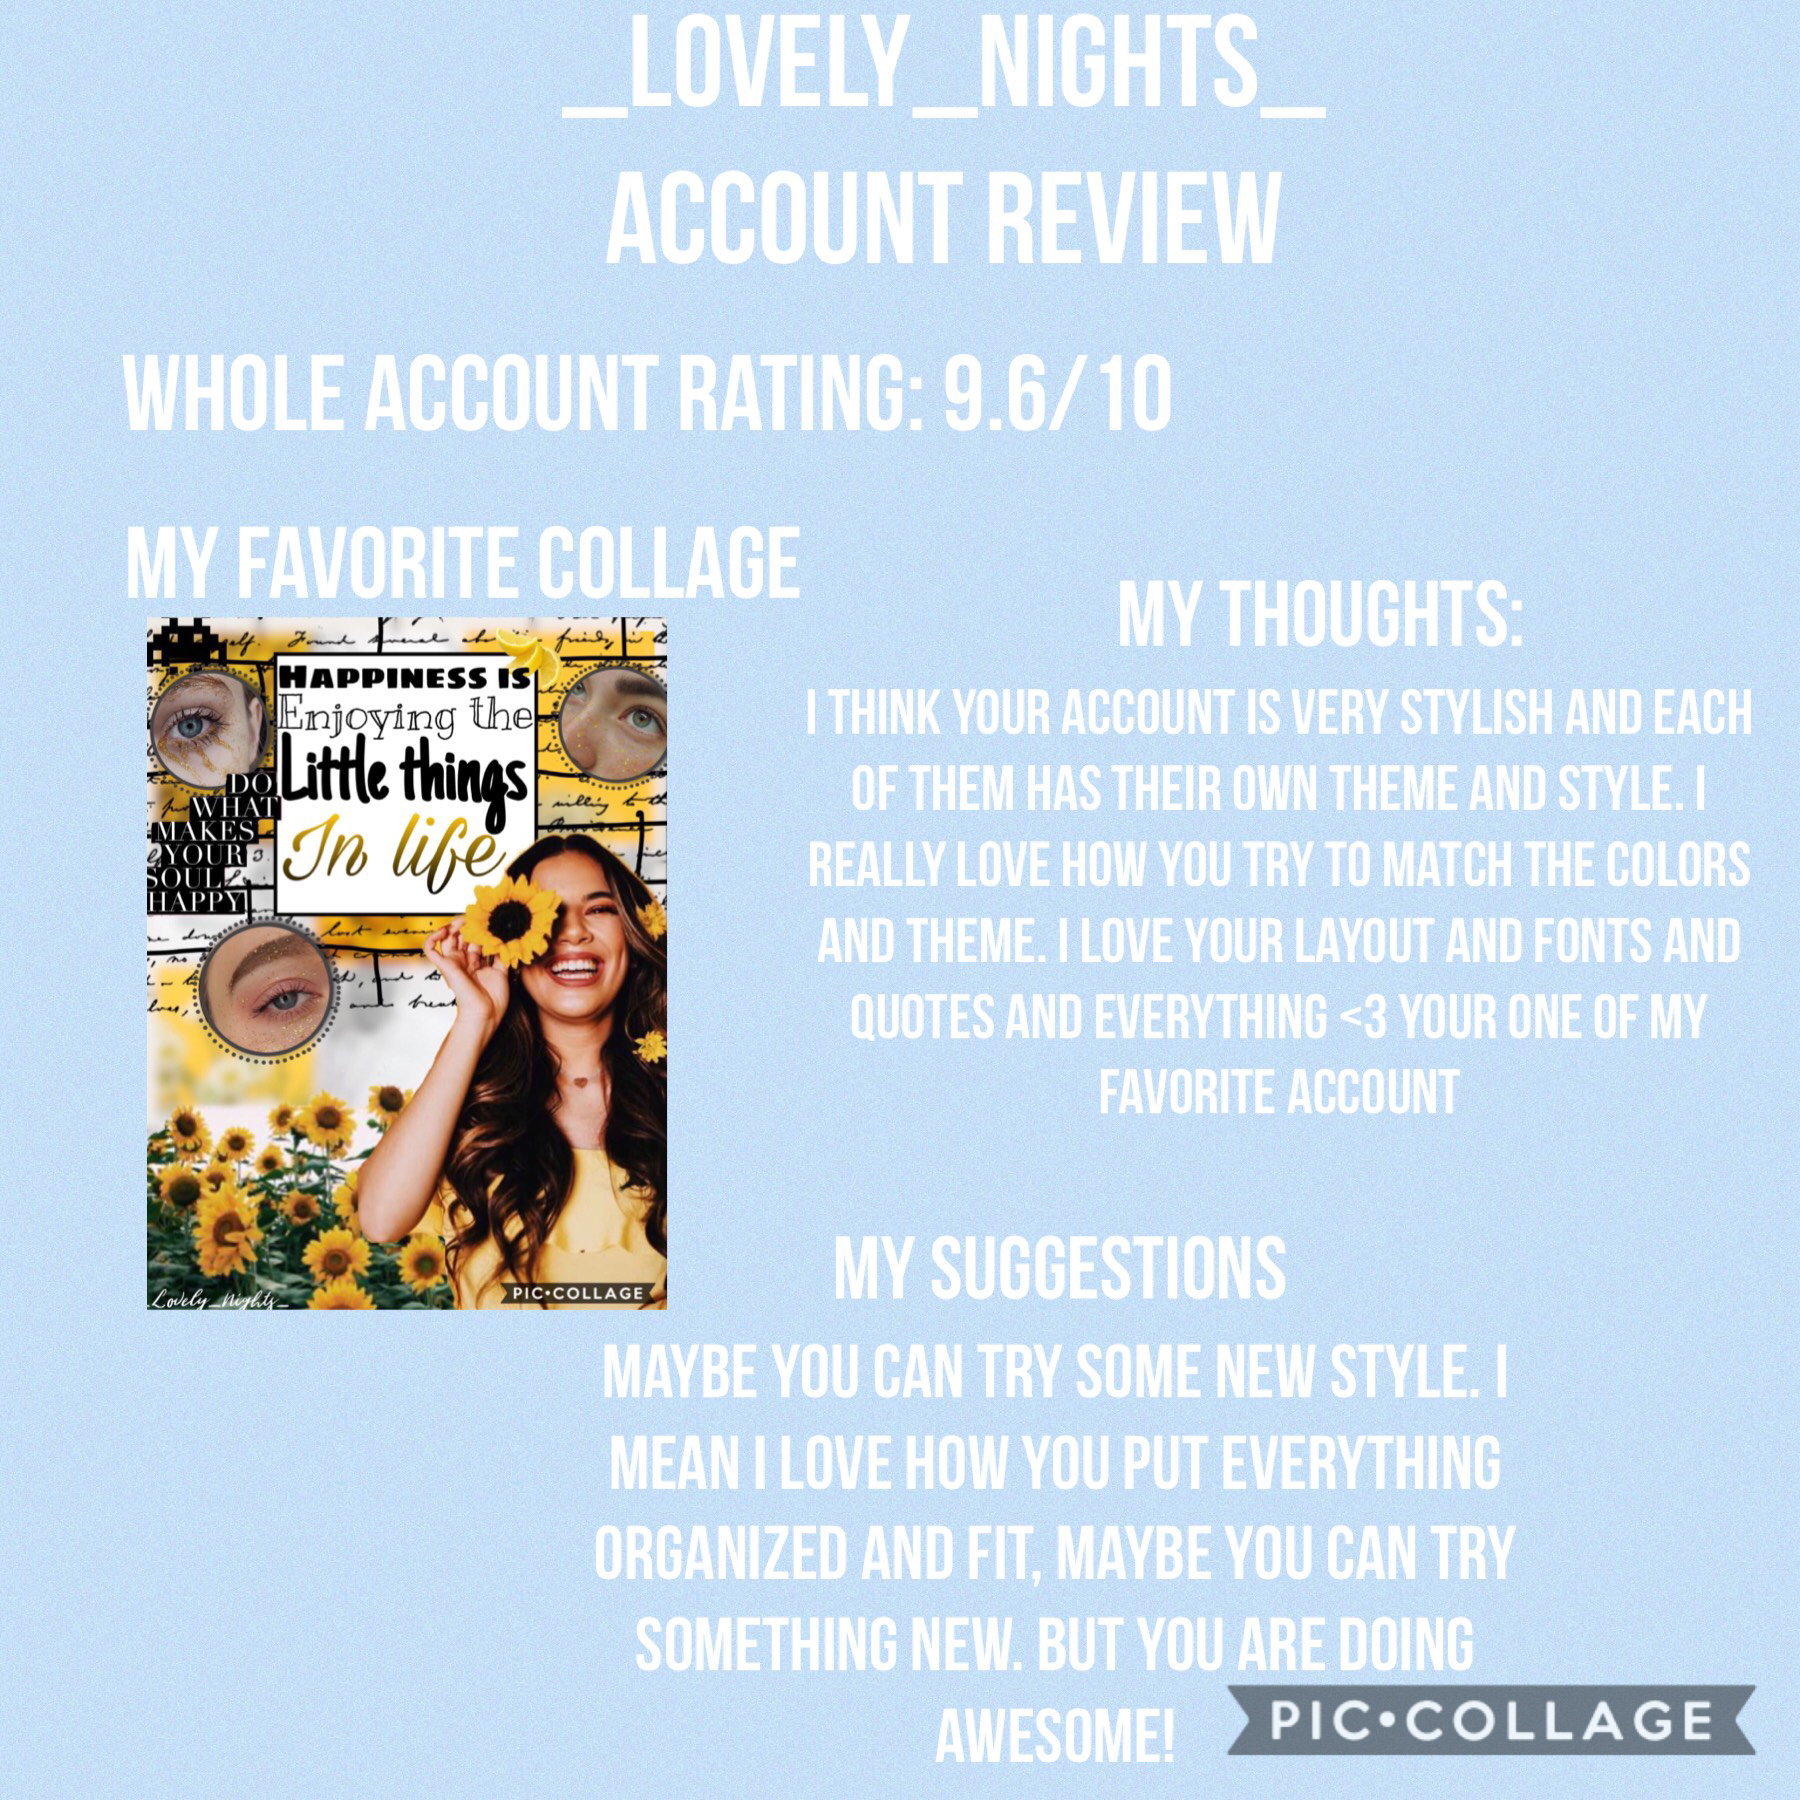 Thank you for entering my account review contest!